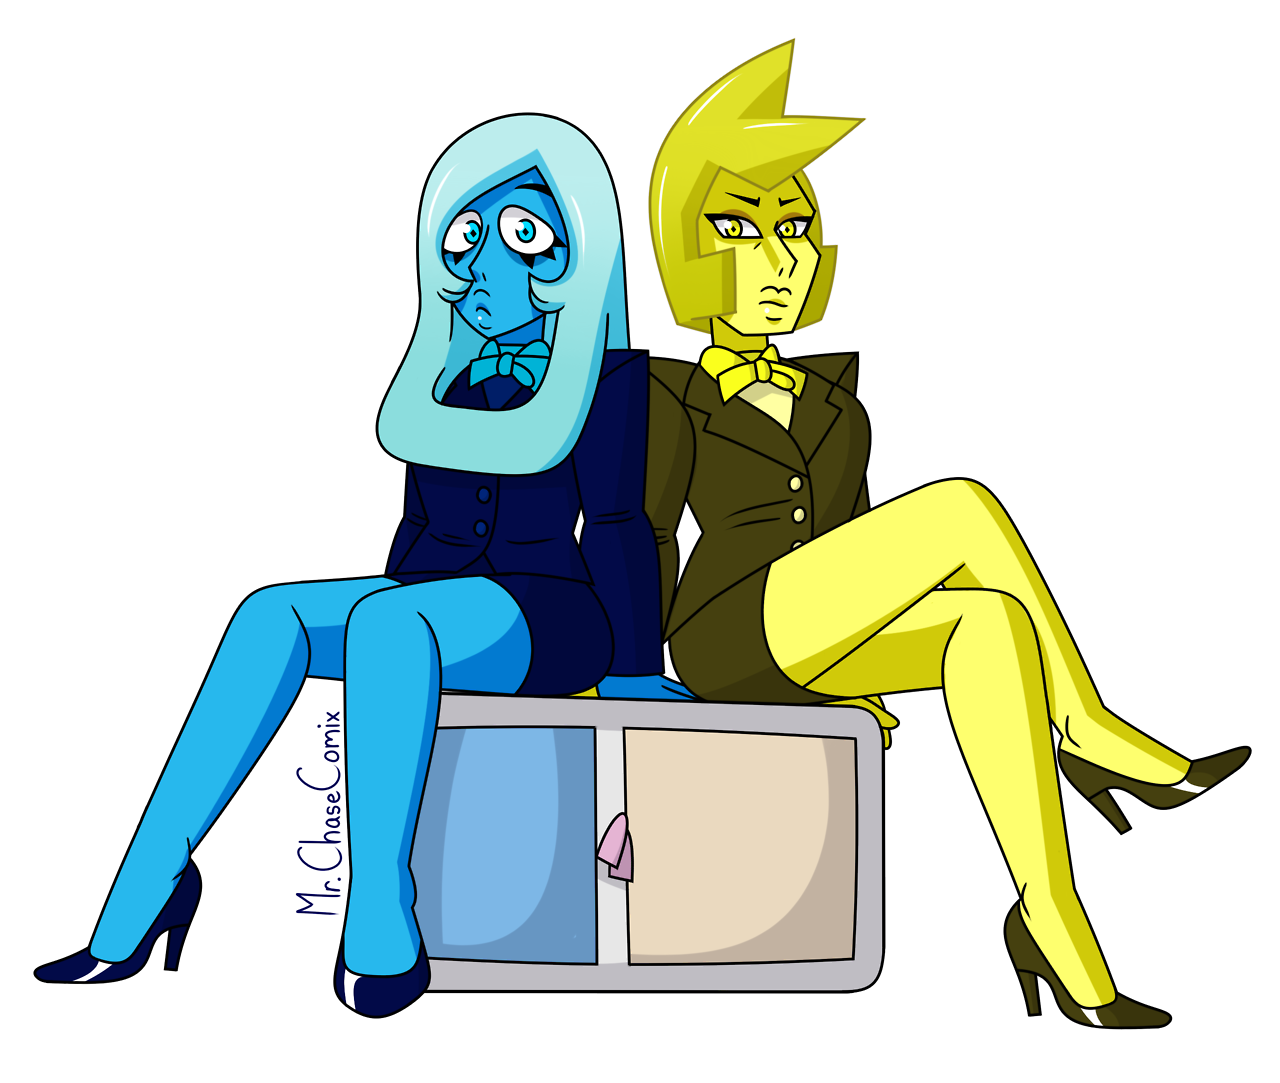 I’ve been getting this request a lot lately, so as promised, here’s some Diamonds as flight attendants.